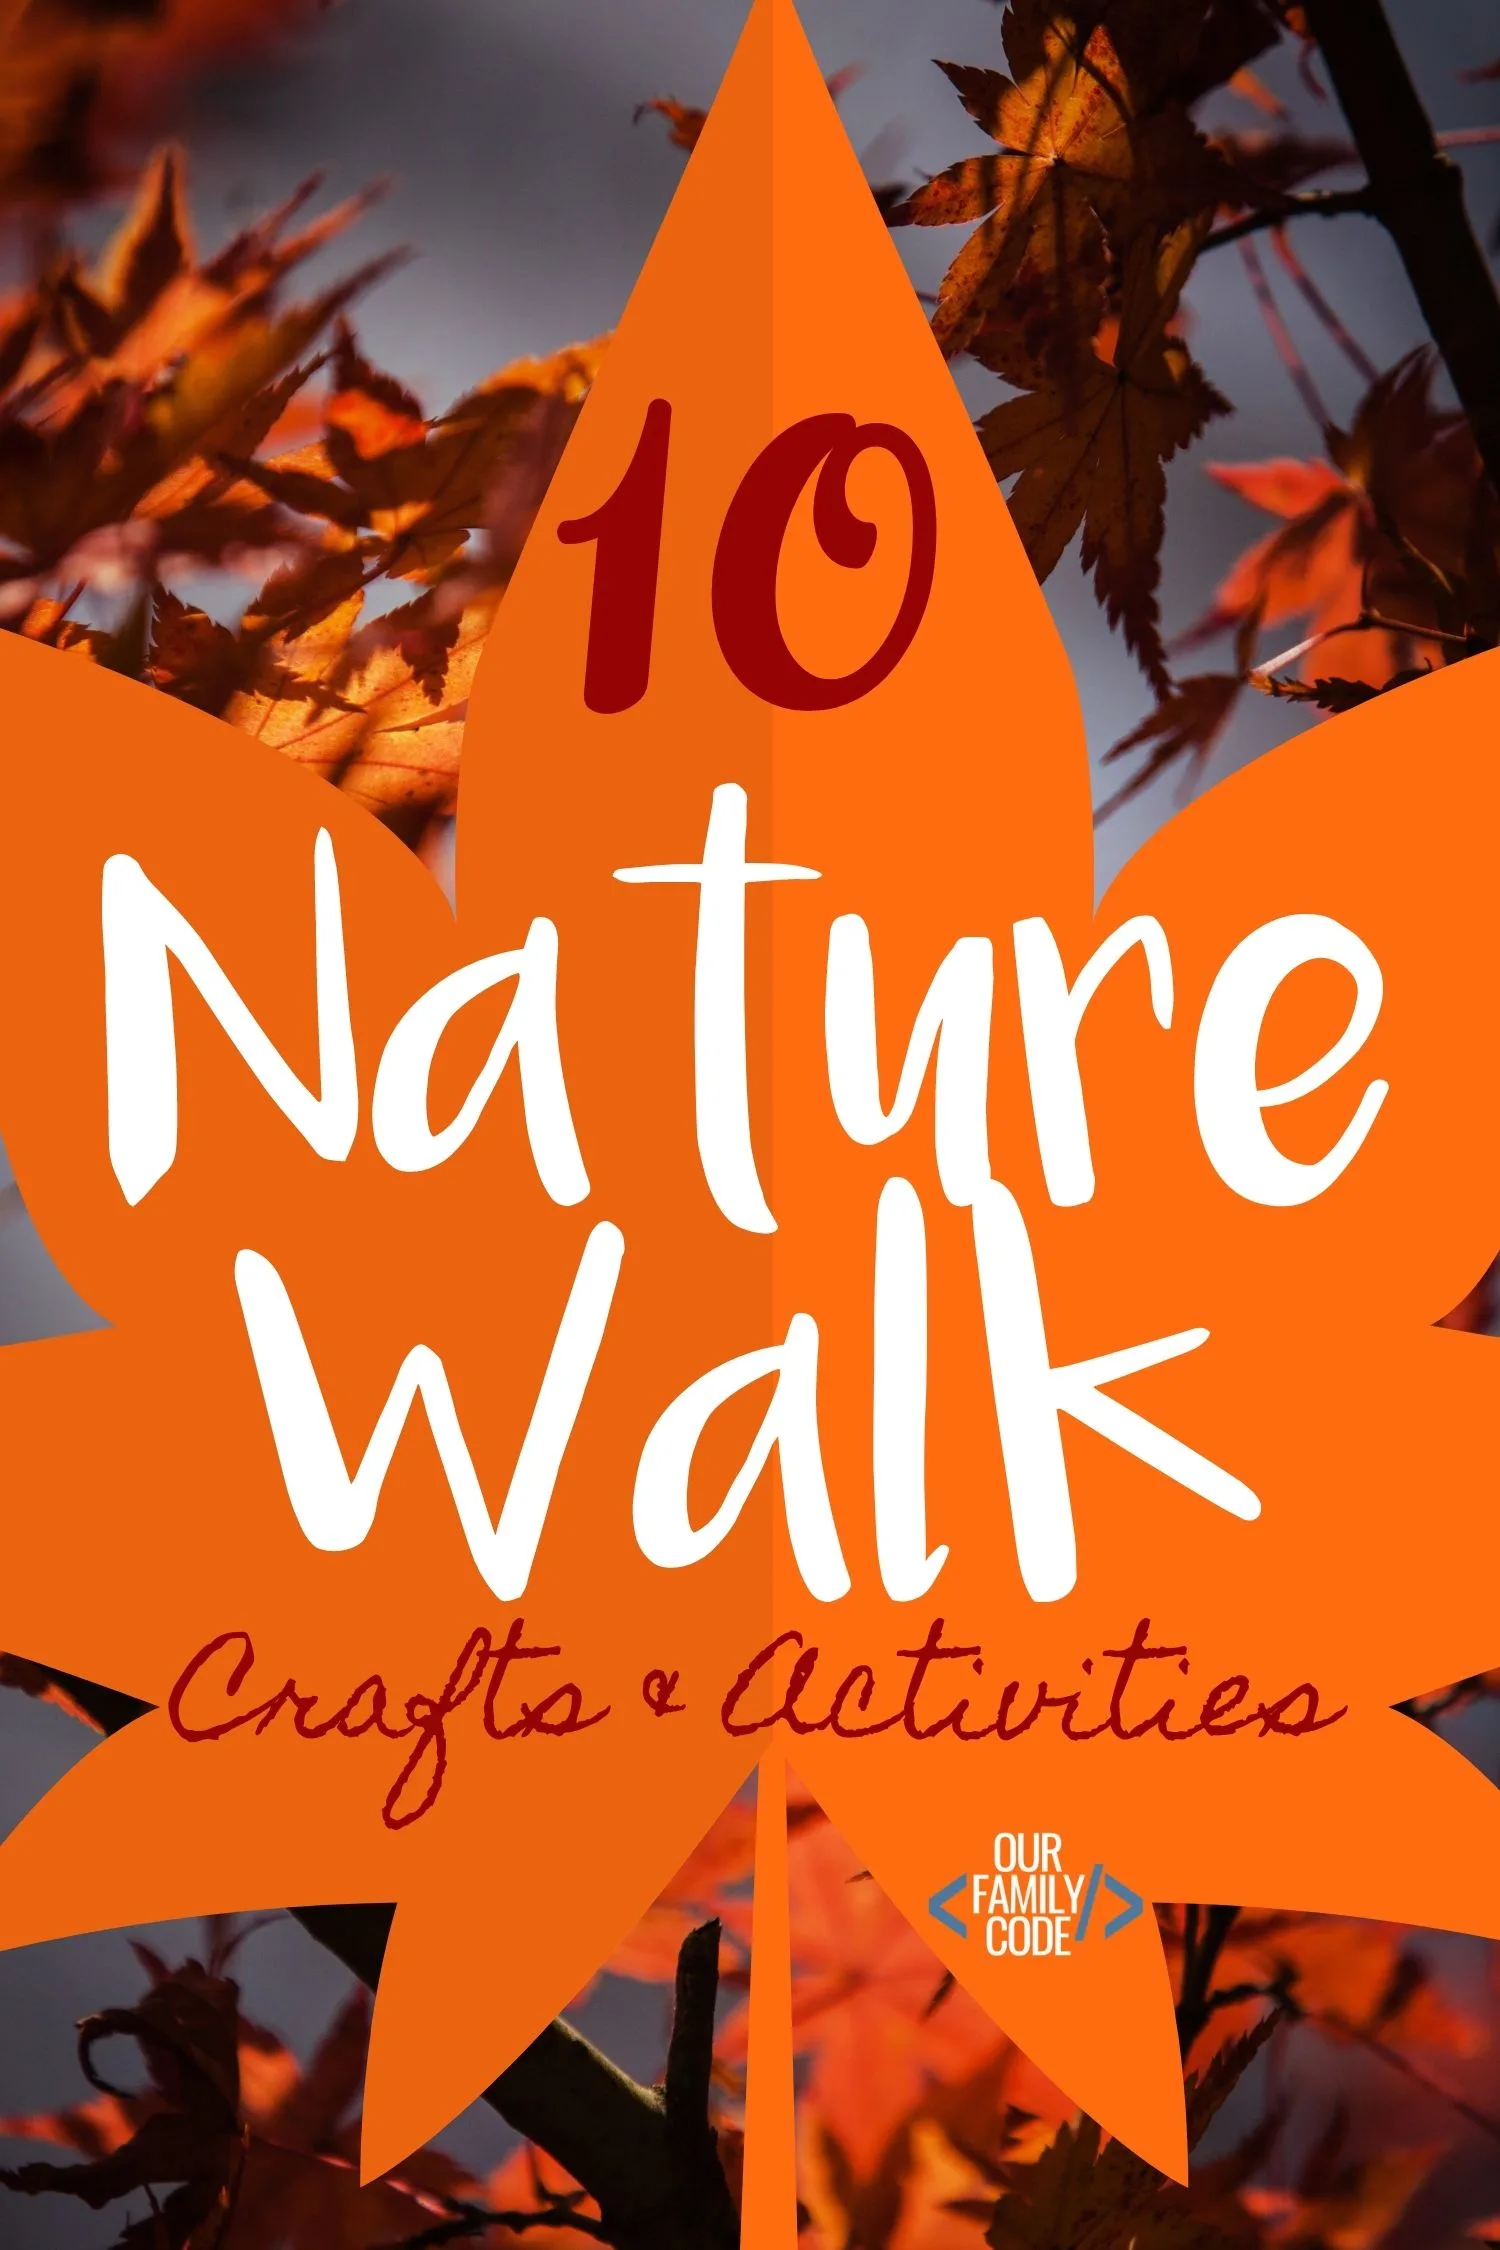 These nature crafts and activities will have taking nature walks all season long! Check out our top 10 nature walk crafts and activities!